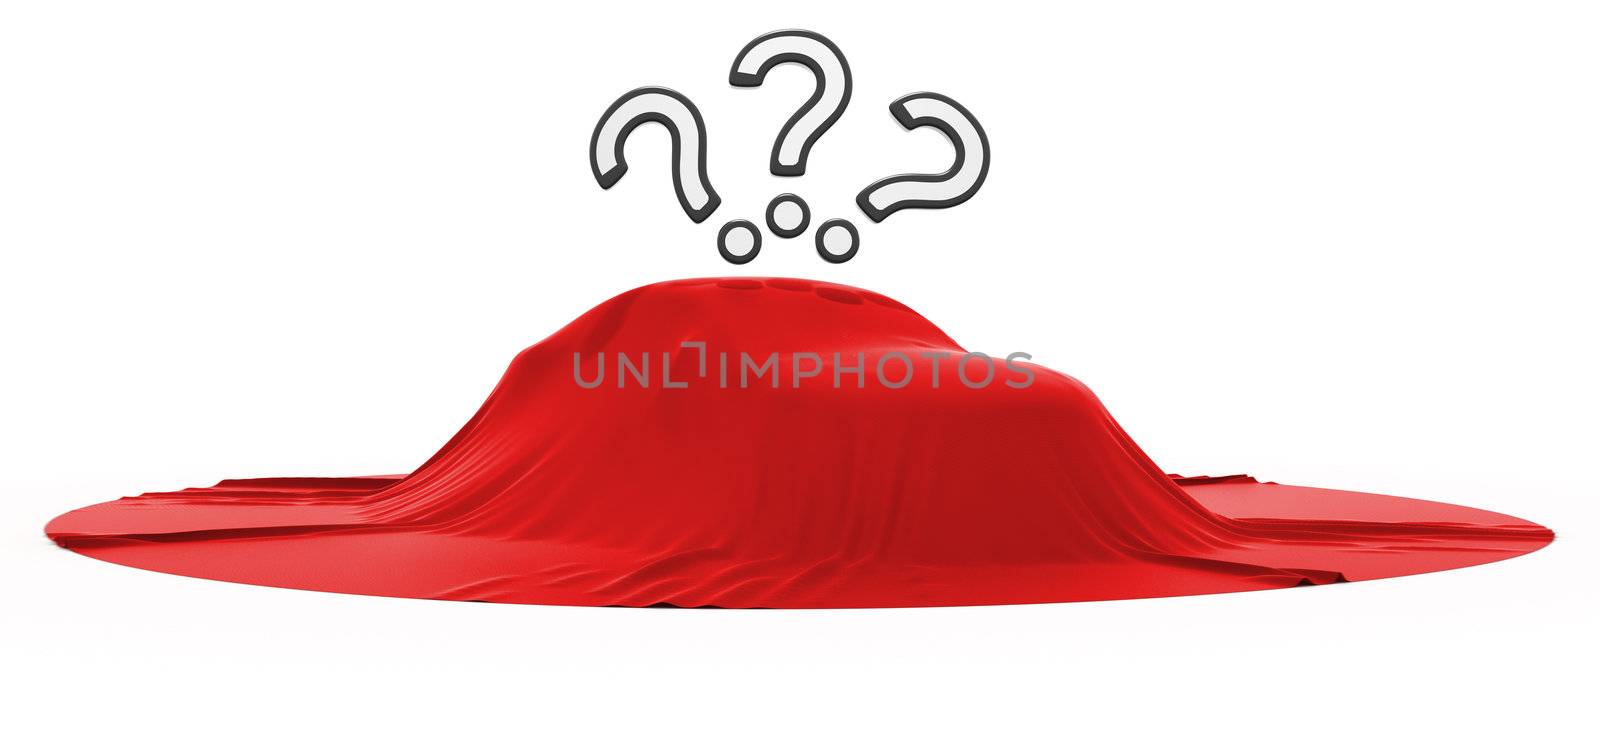 New car reveal with 3 query marks over white background